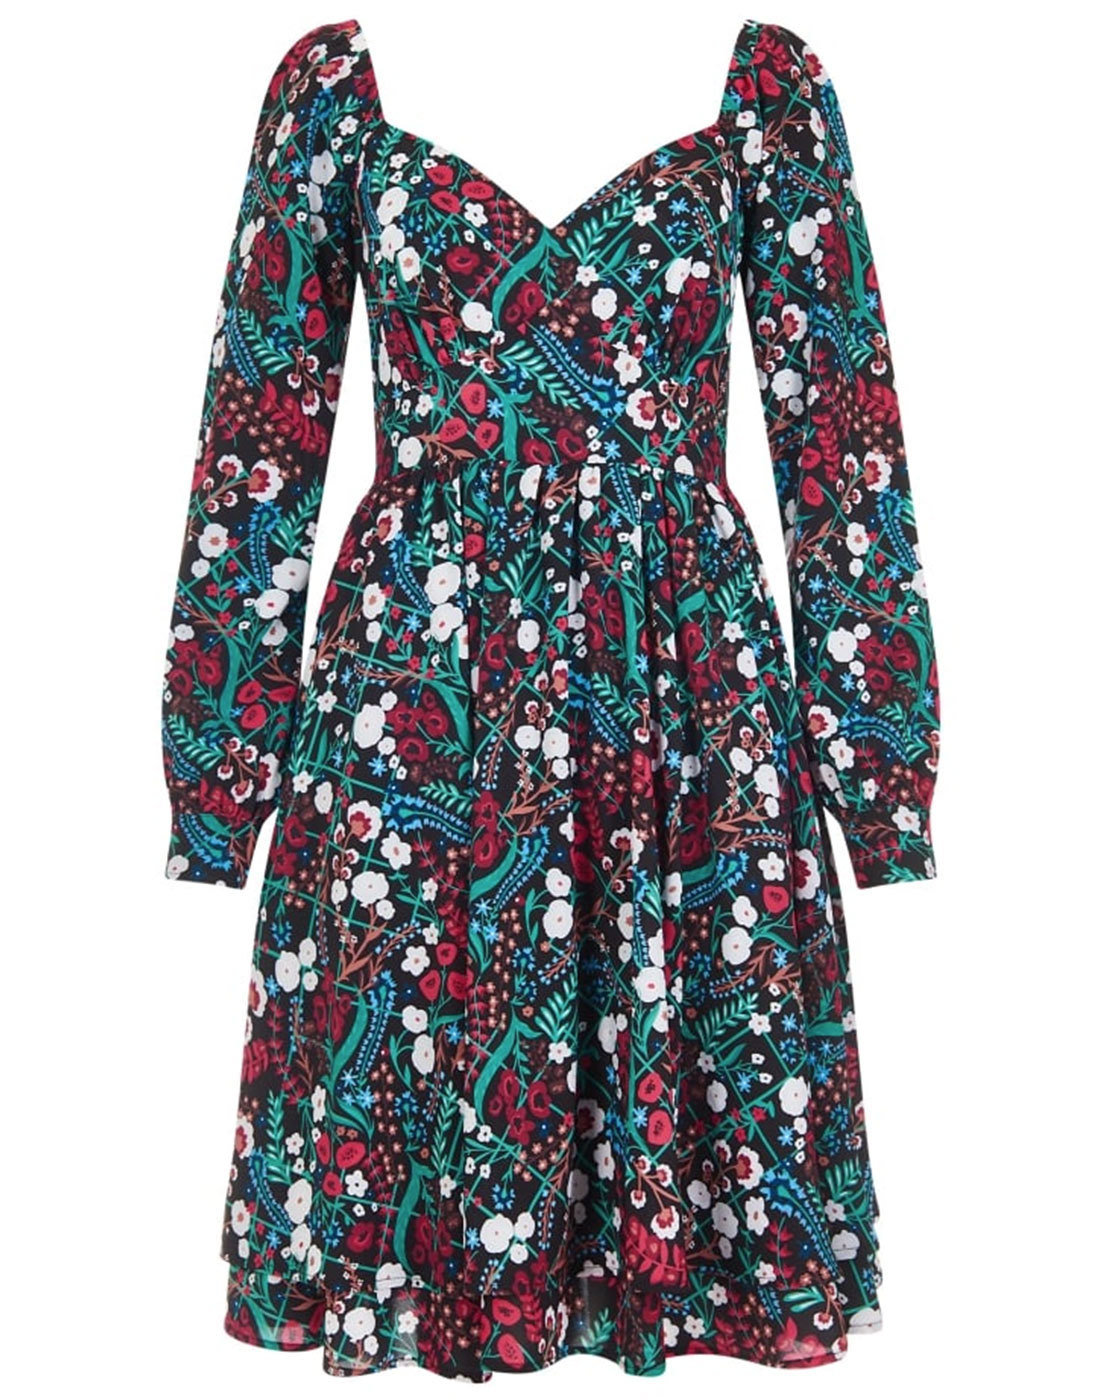 Flora BRIGHT & BEAUTIFUL 1970s Floral Gipsy Dress